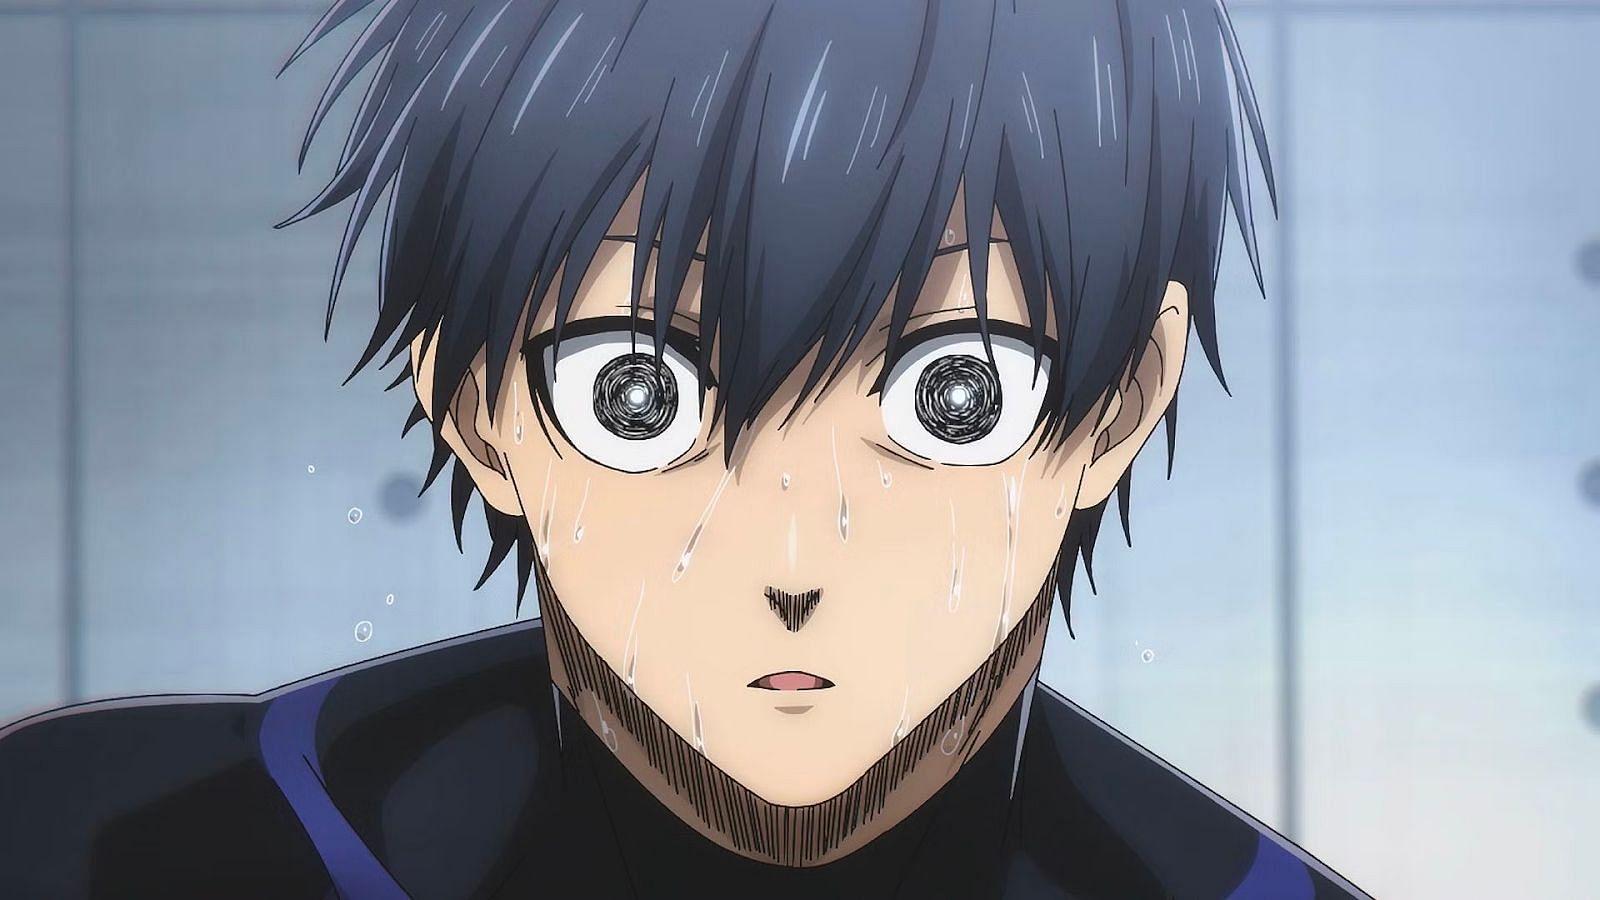 Blue Lock chapter 244 spoilers: Shido Ryusei makes his comeback as PXG's  star playmaker gets revealed